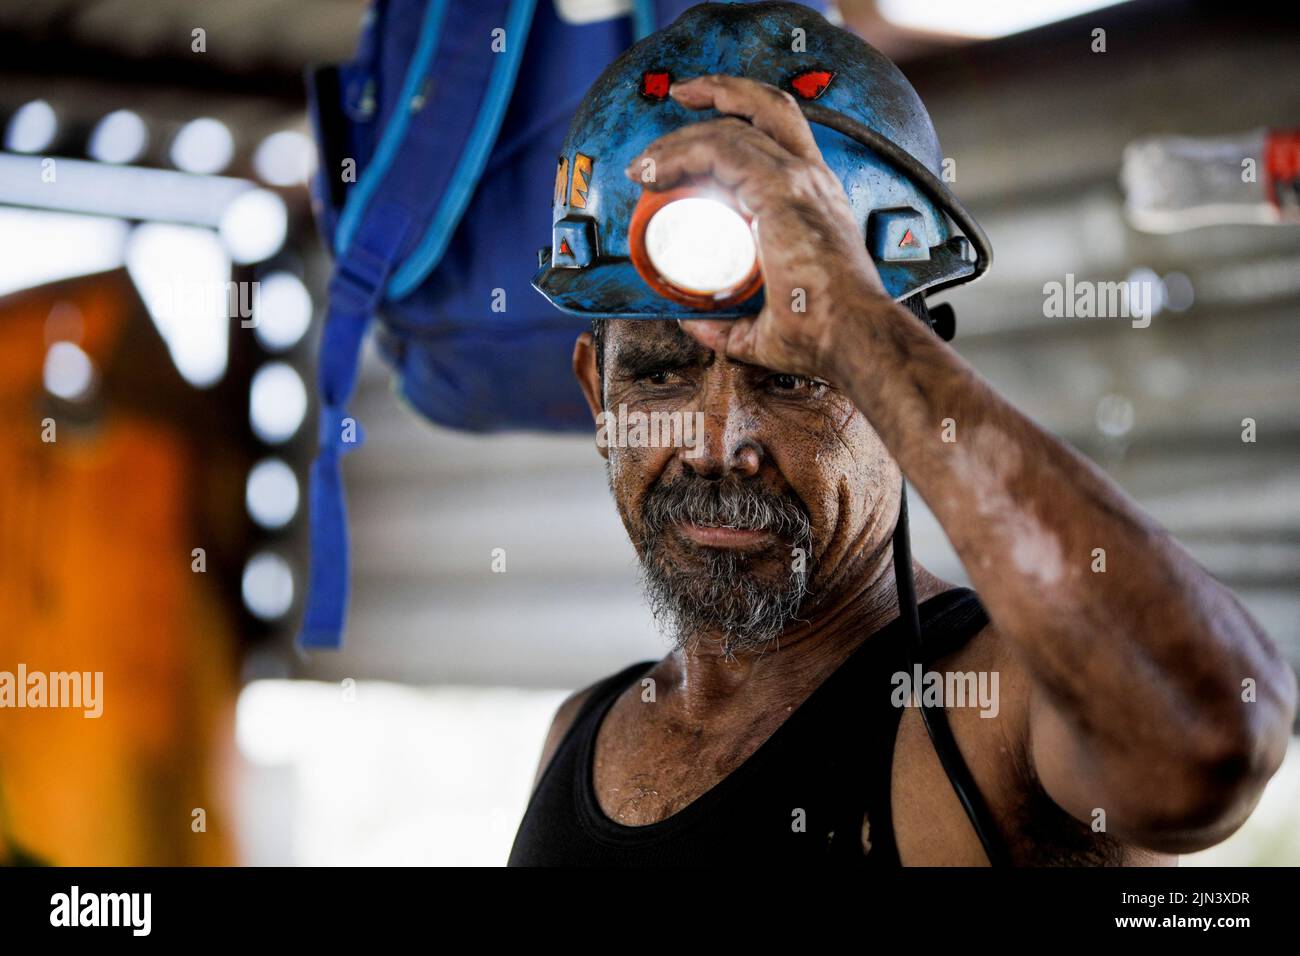 A miner works at an artisanal coal mine, or 'pocito' (little hole), known for their rudimentary and often dangerous mining techniques, in Sabinas, Coahuila state, Mexico, August 8, 2022. REUTERS/Luis Cortes Stock Photo